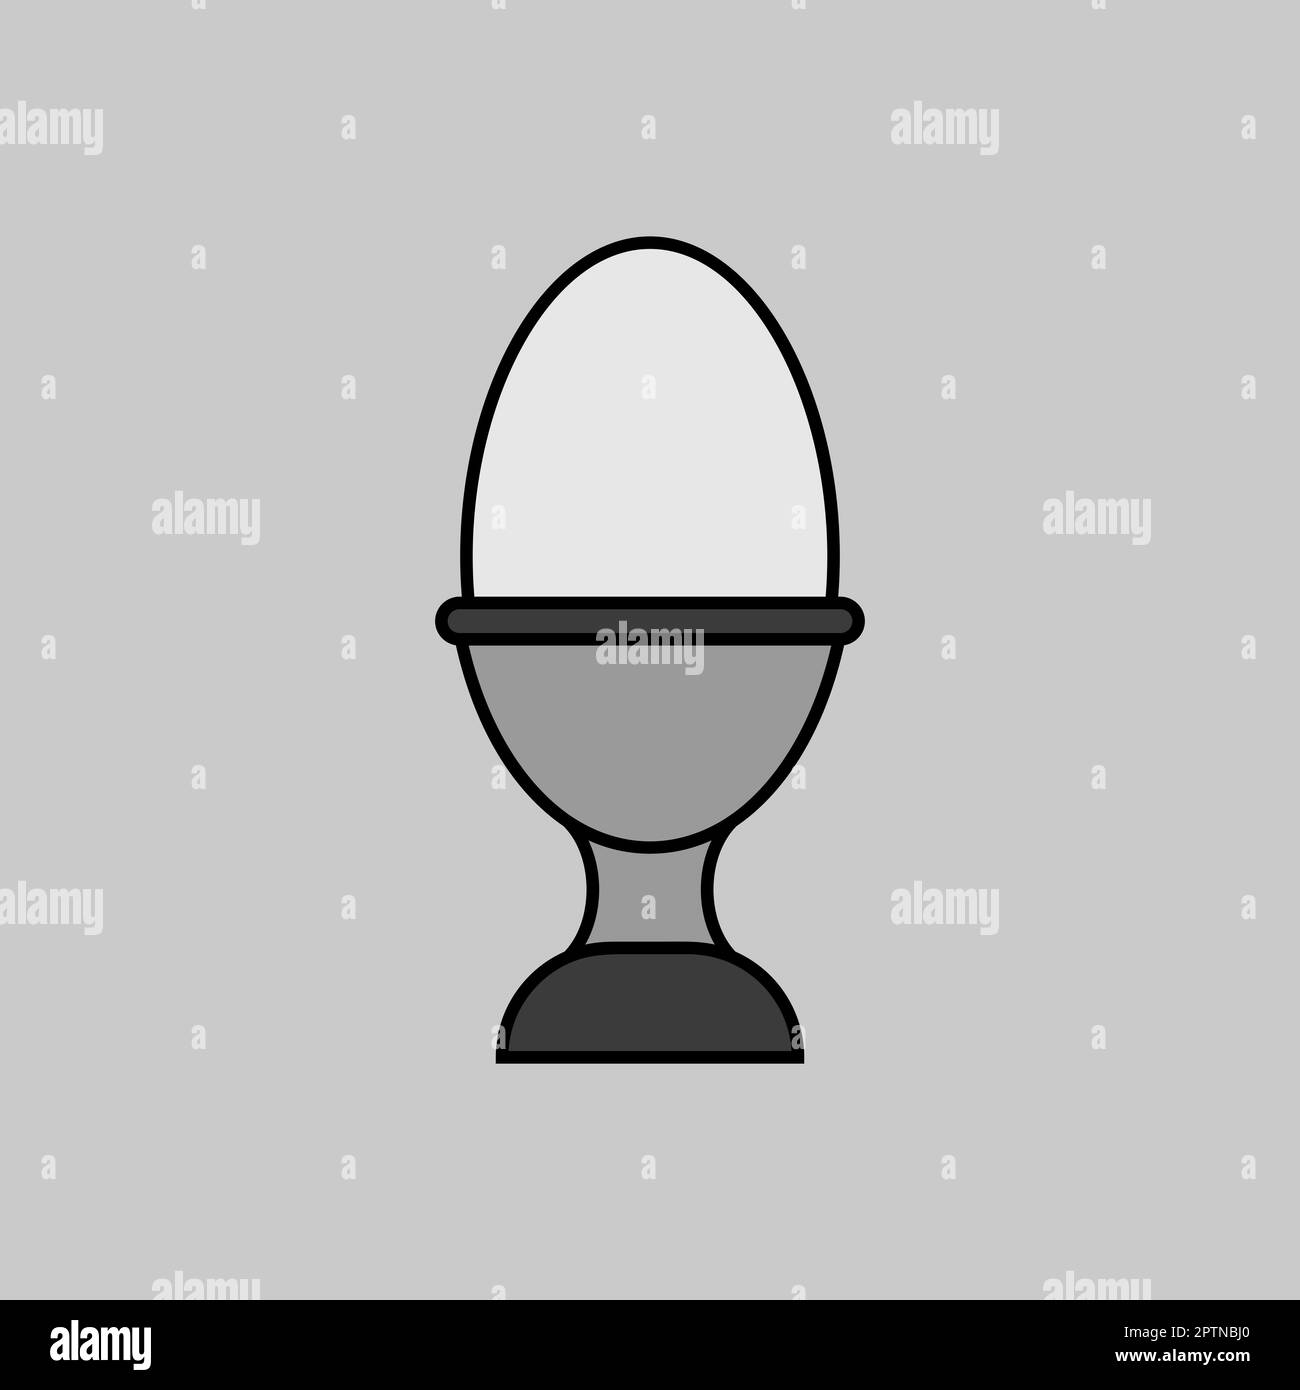 Soft boiled egg in an egg cup vector grayscale icon. Kitchen appliance. Graph symbol for cooking web site design, logo, app, UI Stock Photo